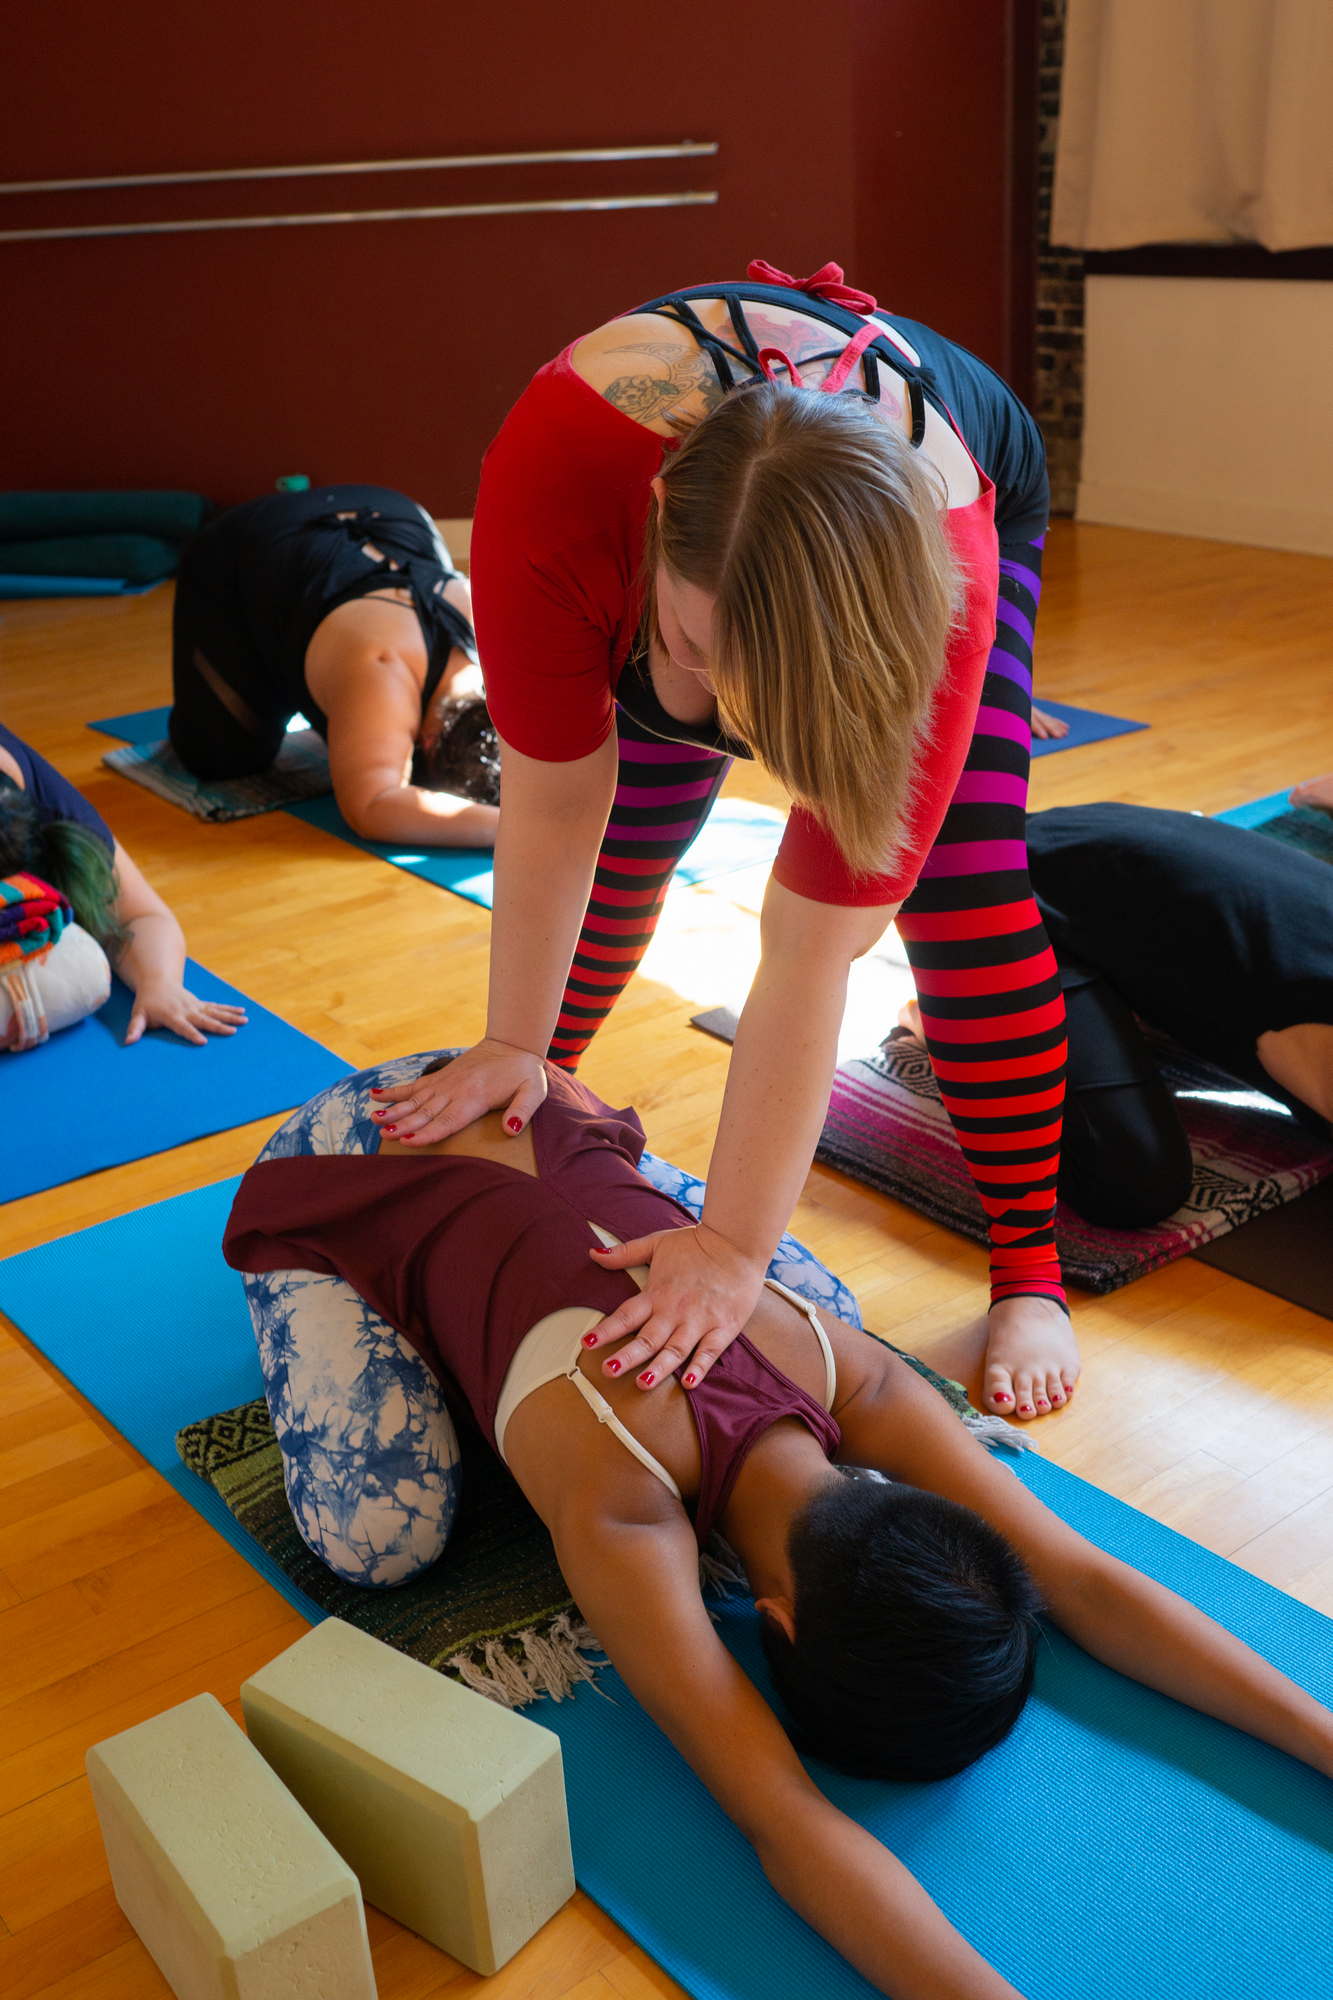  A fat yoga instructor assists a student with a pose on a mat